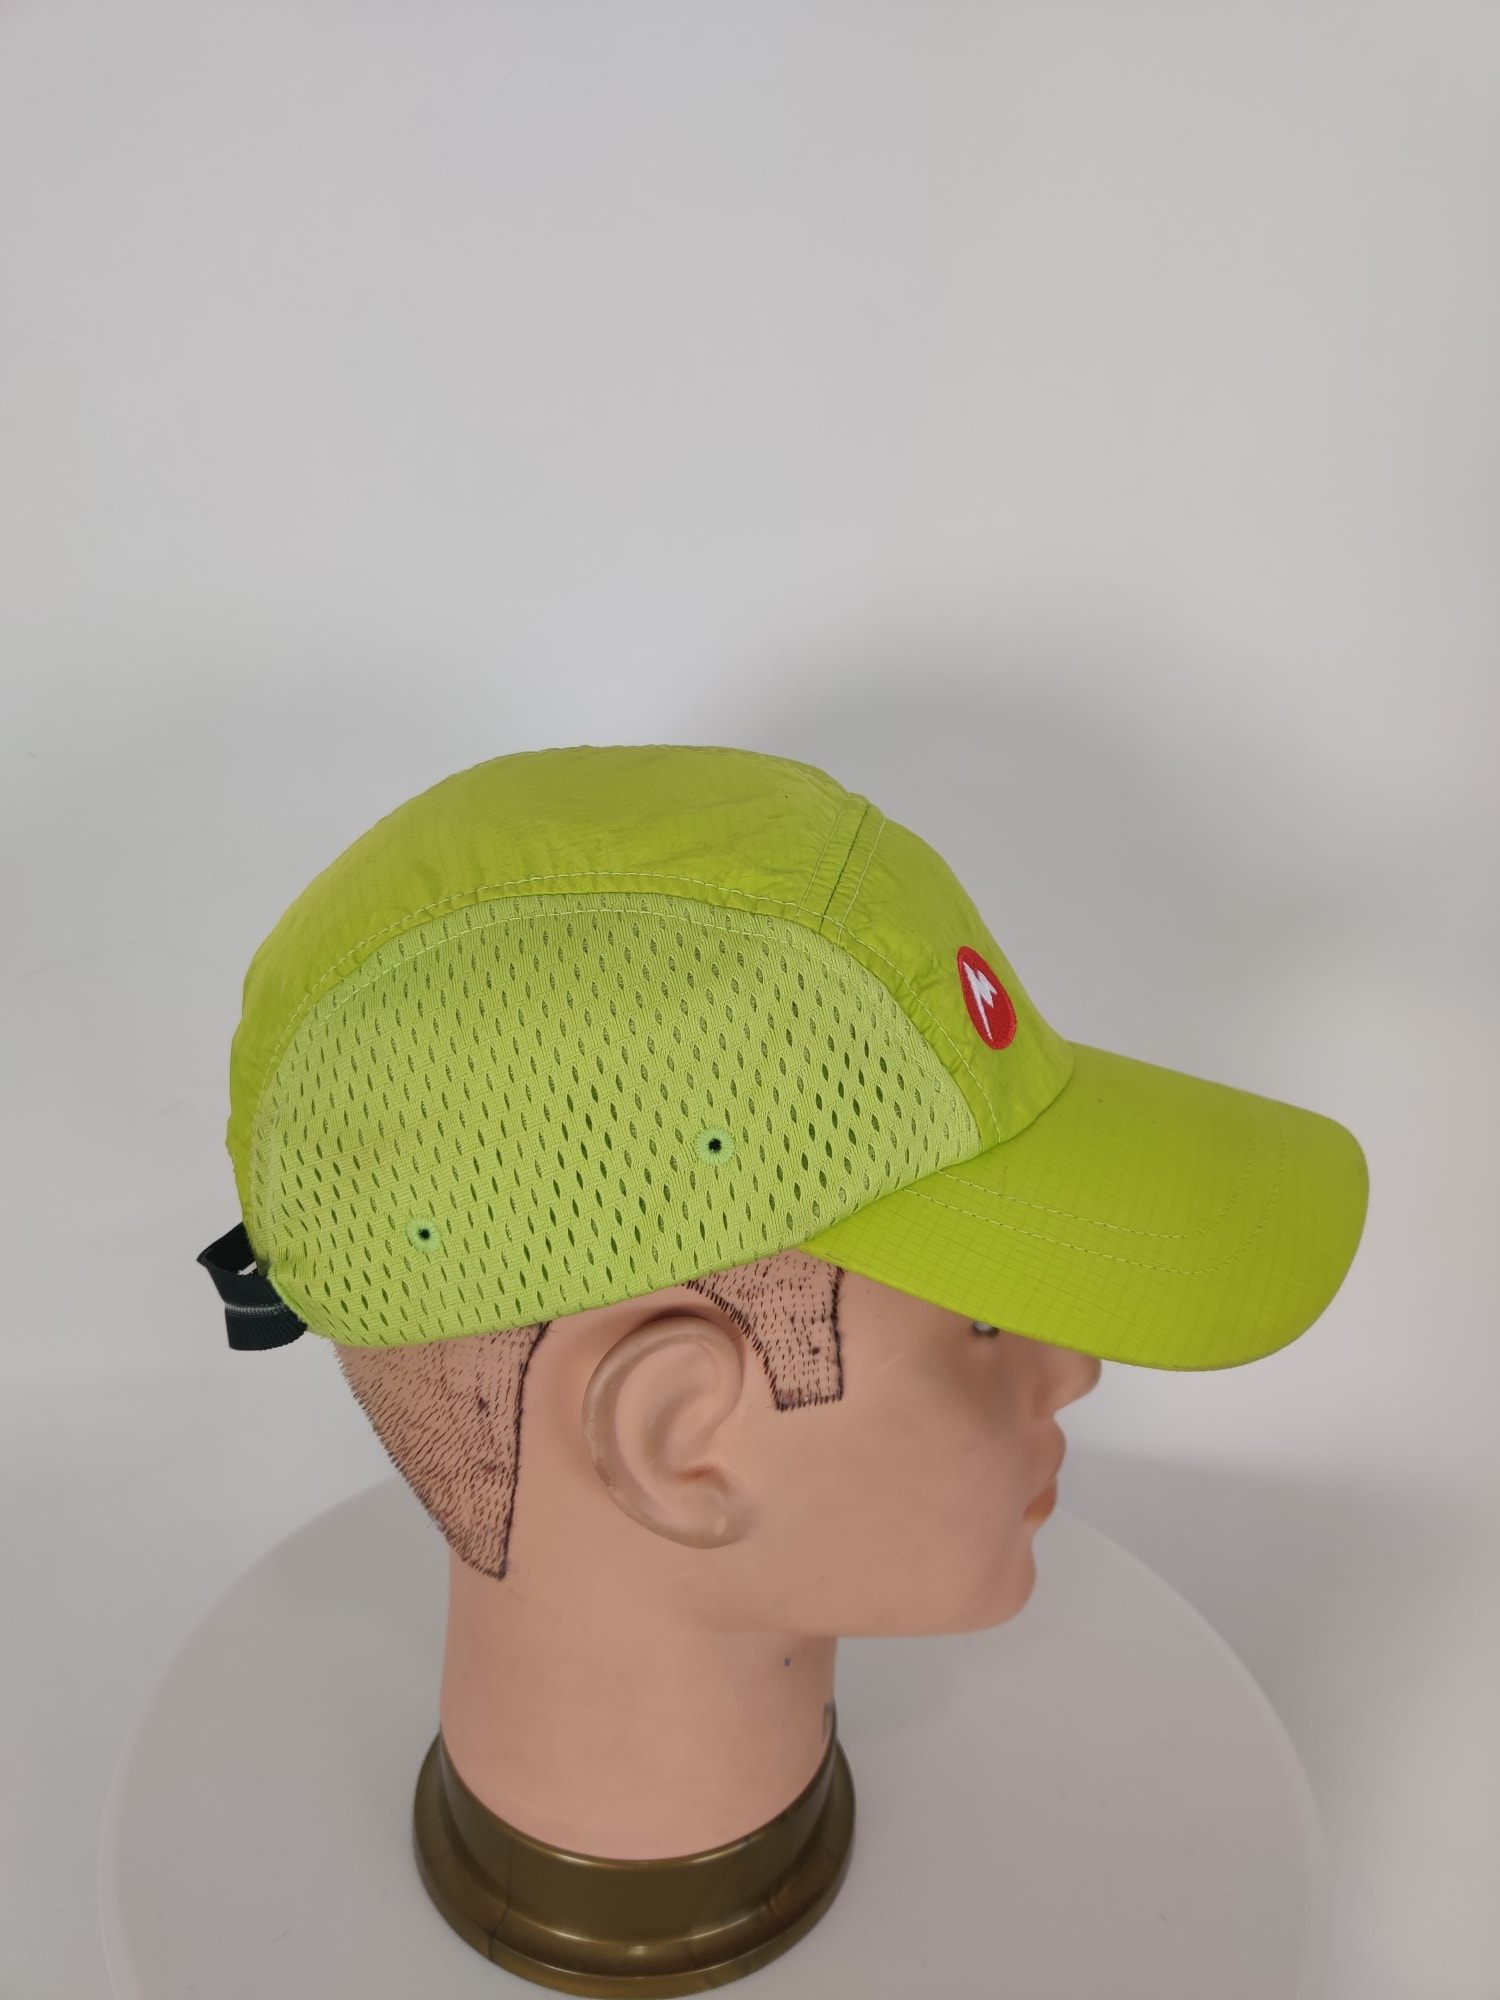 (V) Marmot Unisex cycling hat hiking casual lightweight adjustable green OS  - Picture 5 of 8